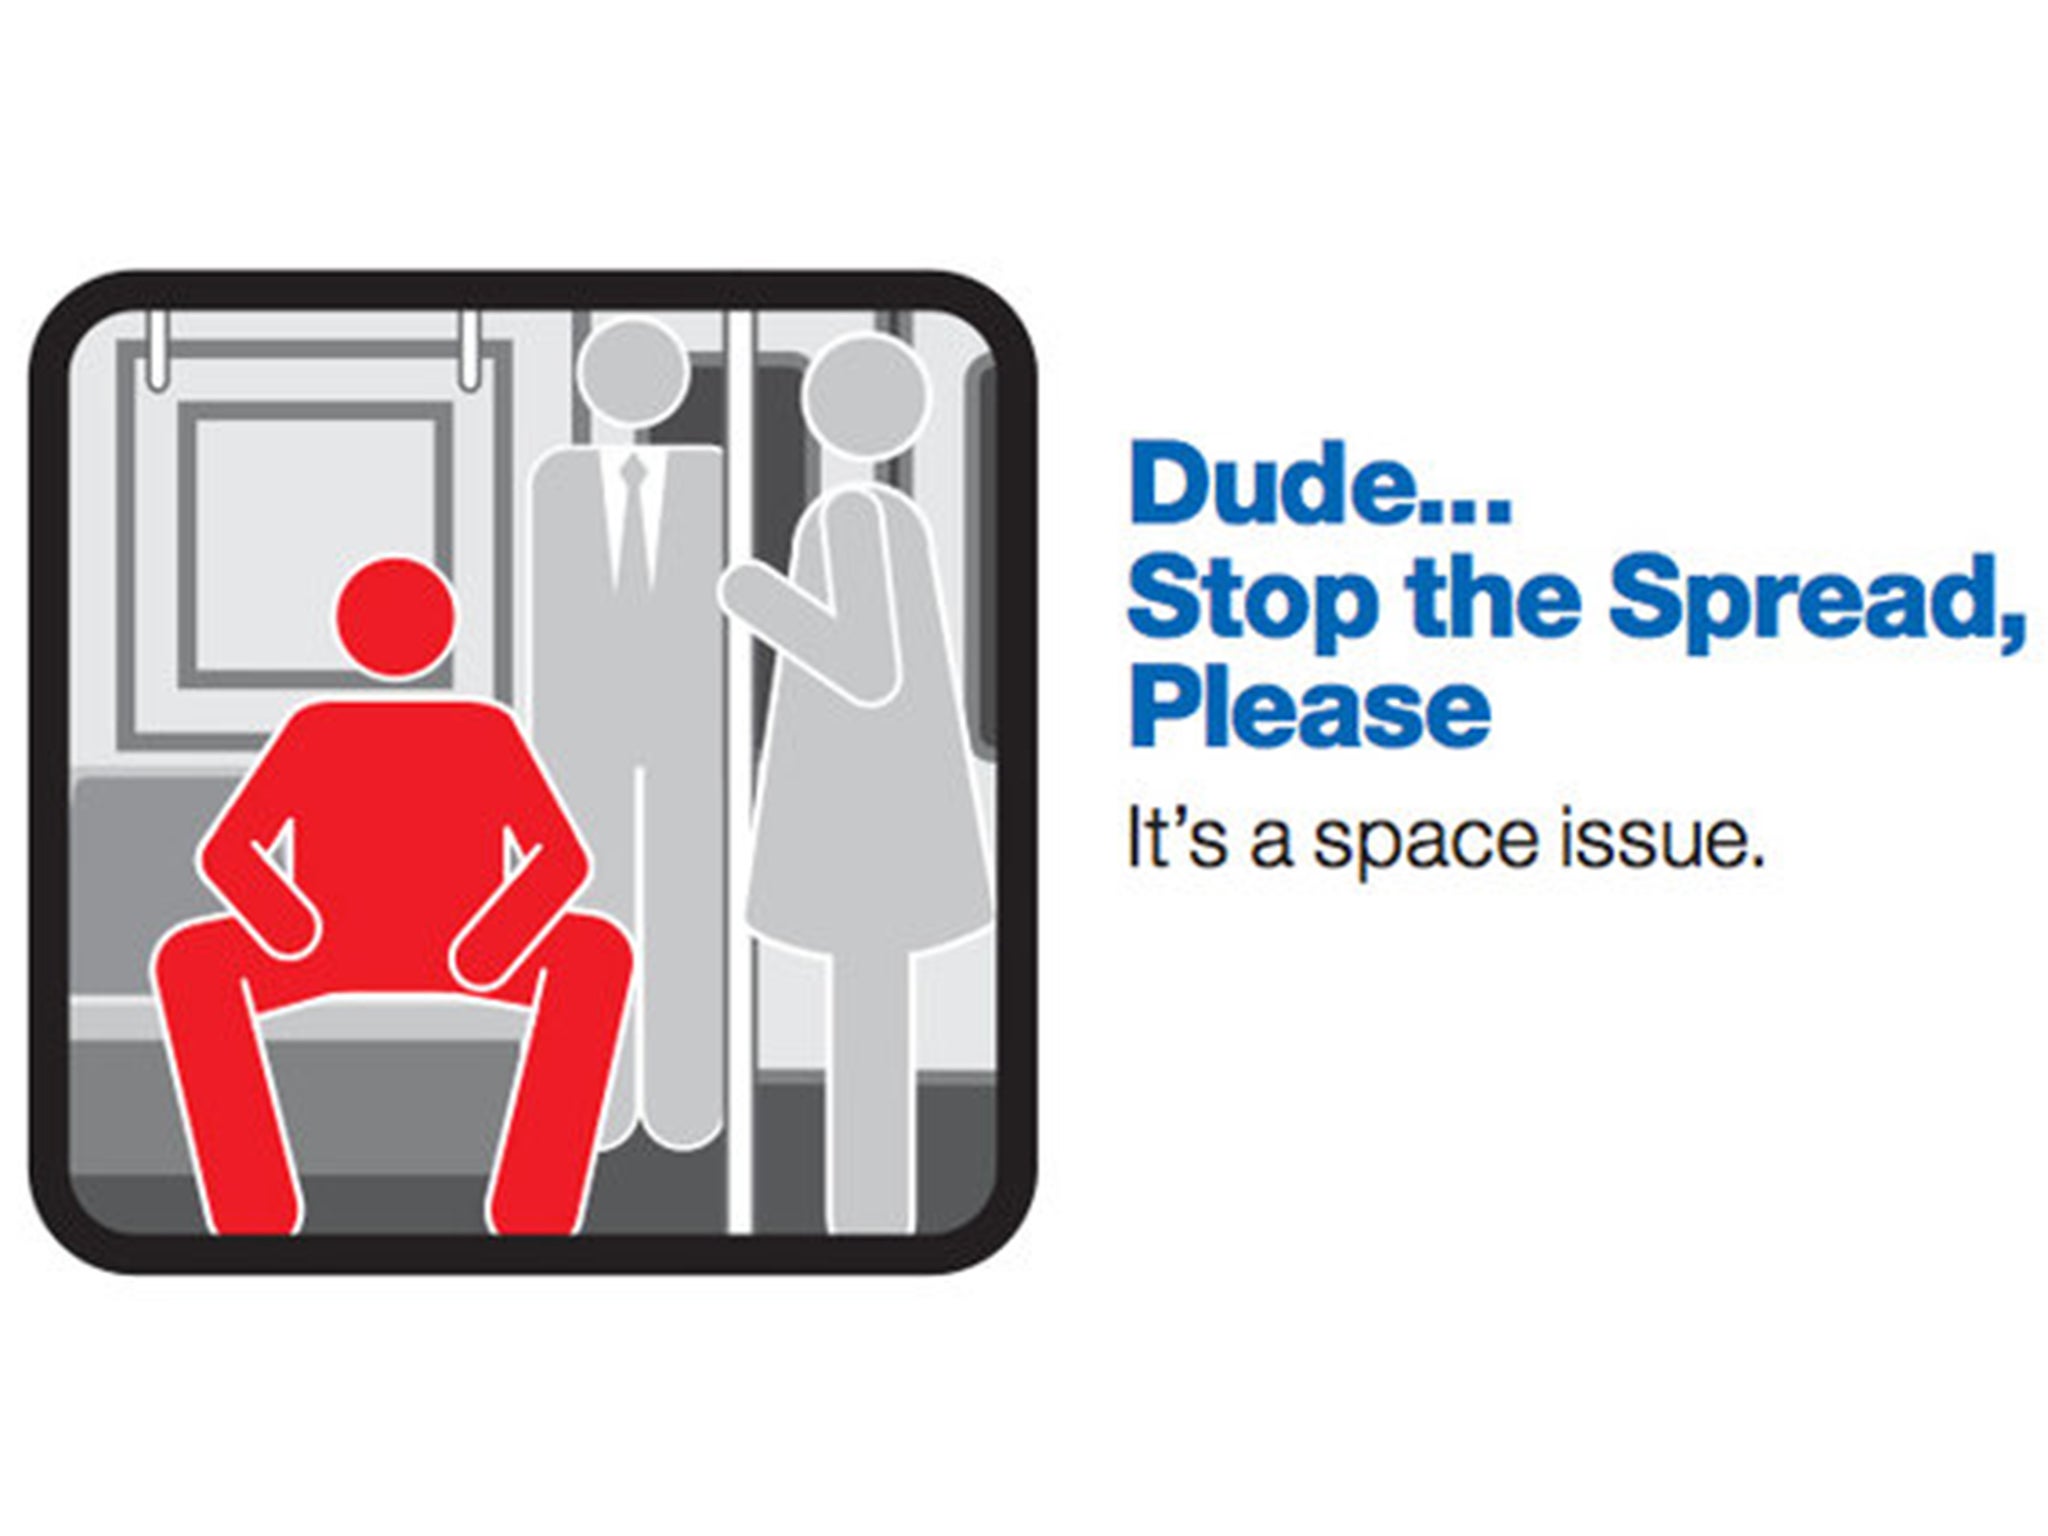 One of the posters used in the Manhattan Transport Authority's anti-manspreading campaign